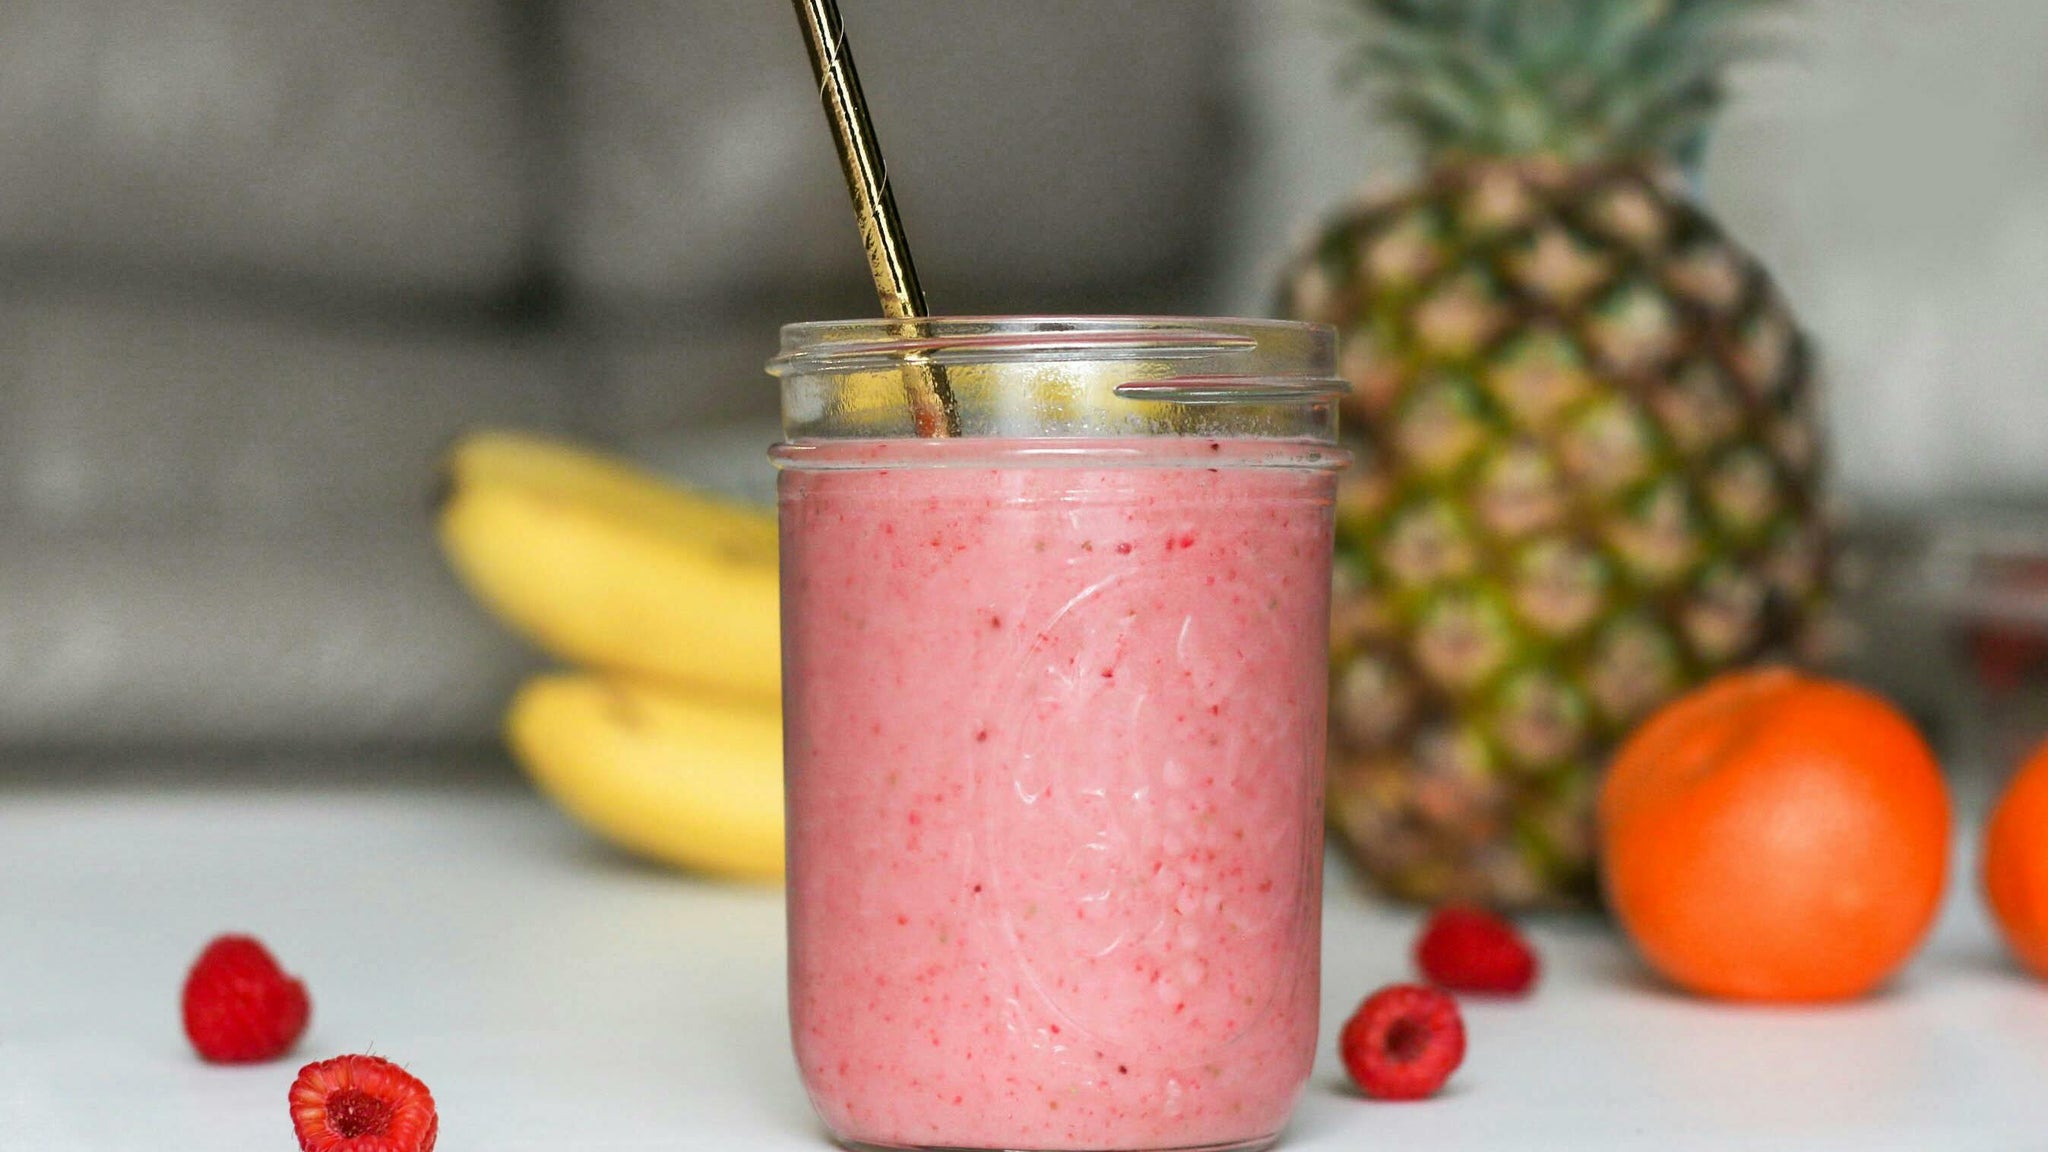 PCOS Smoothies - Our Top 5 PCOS Smoothie Ideas